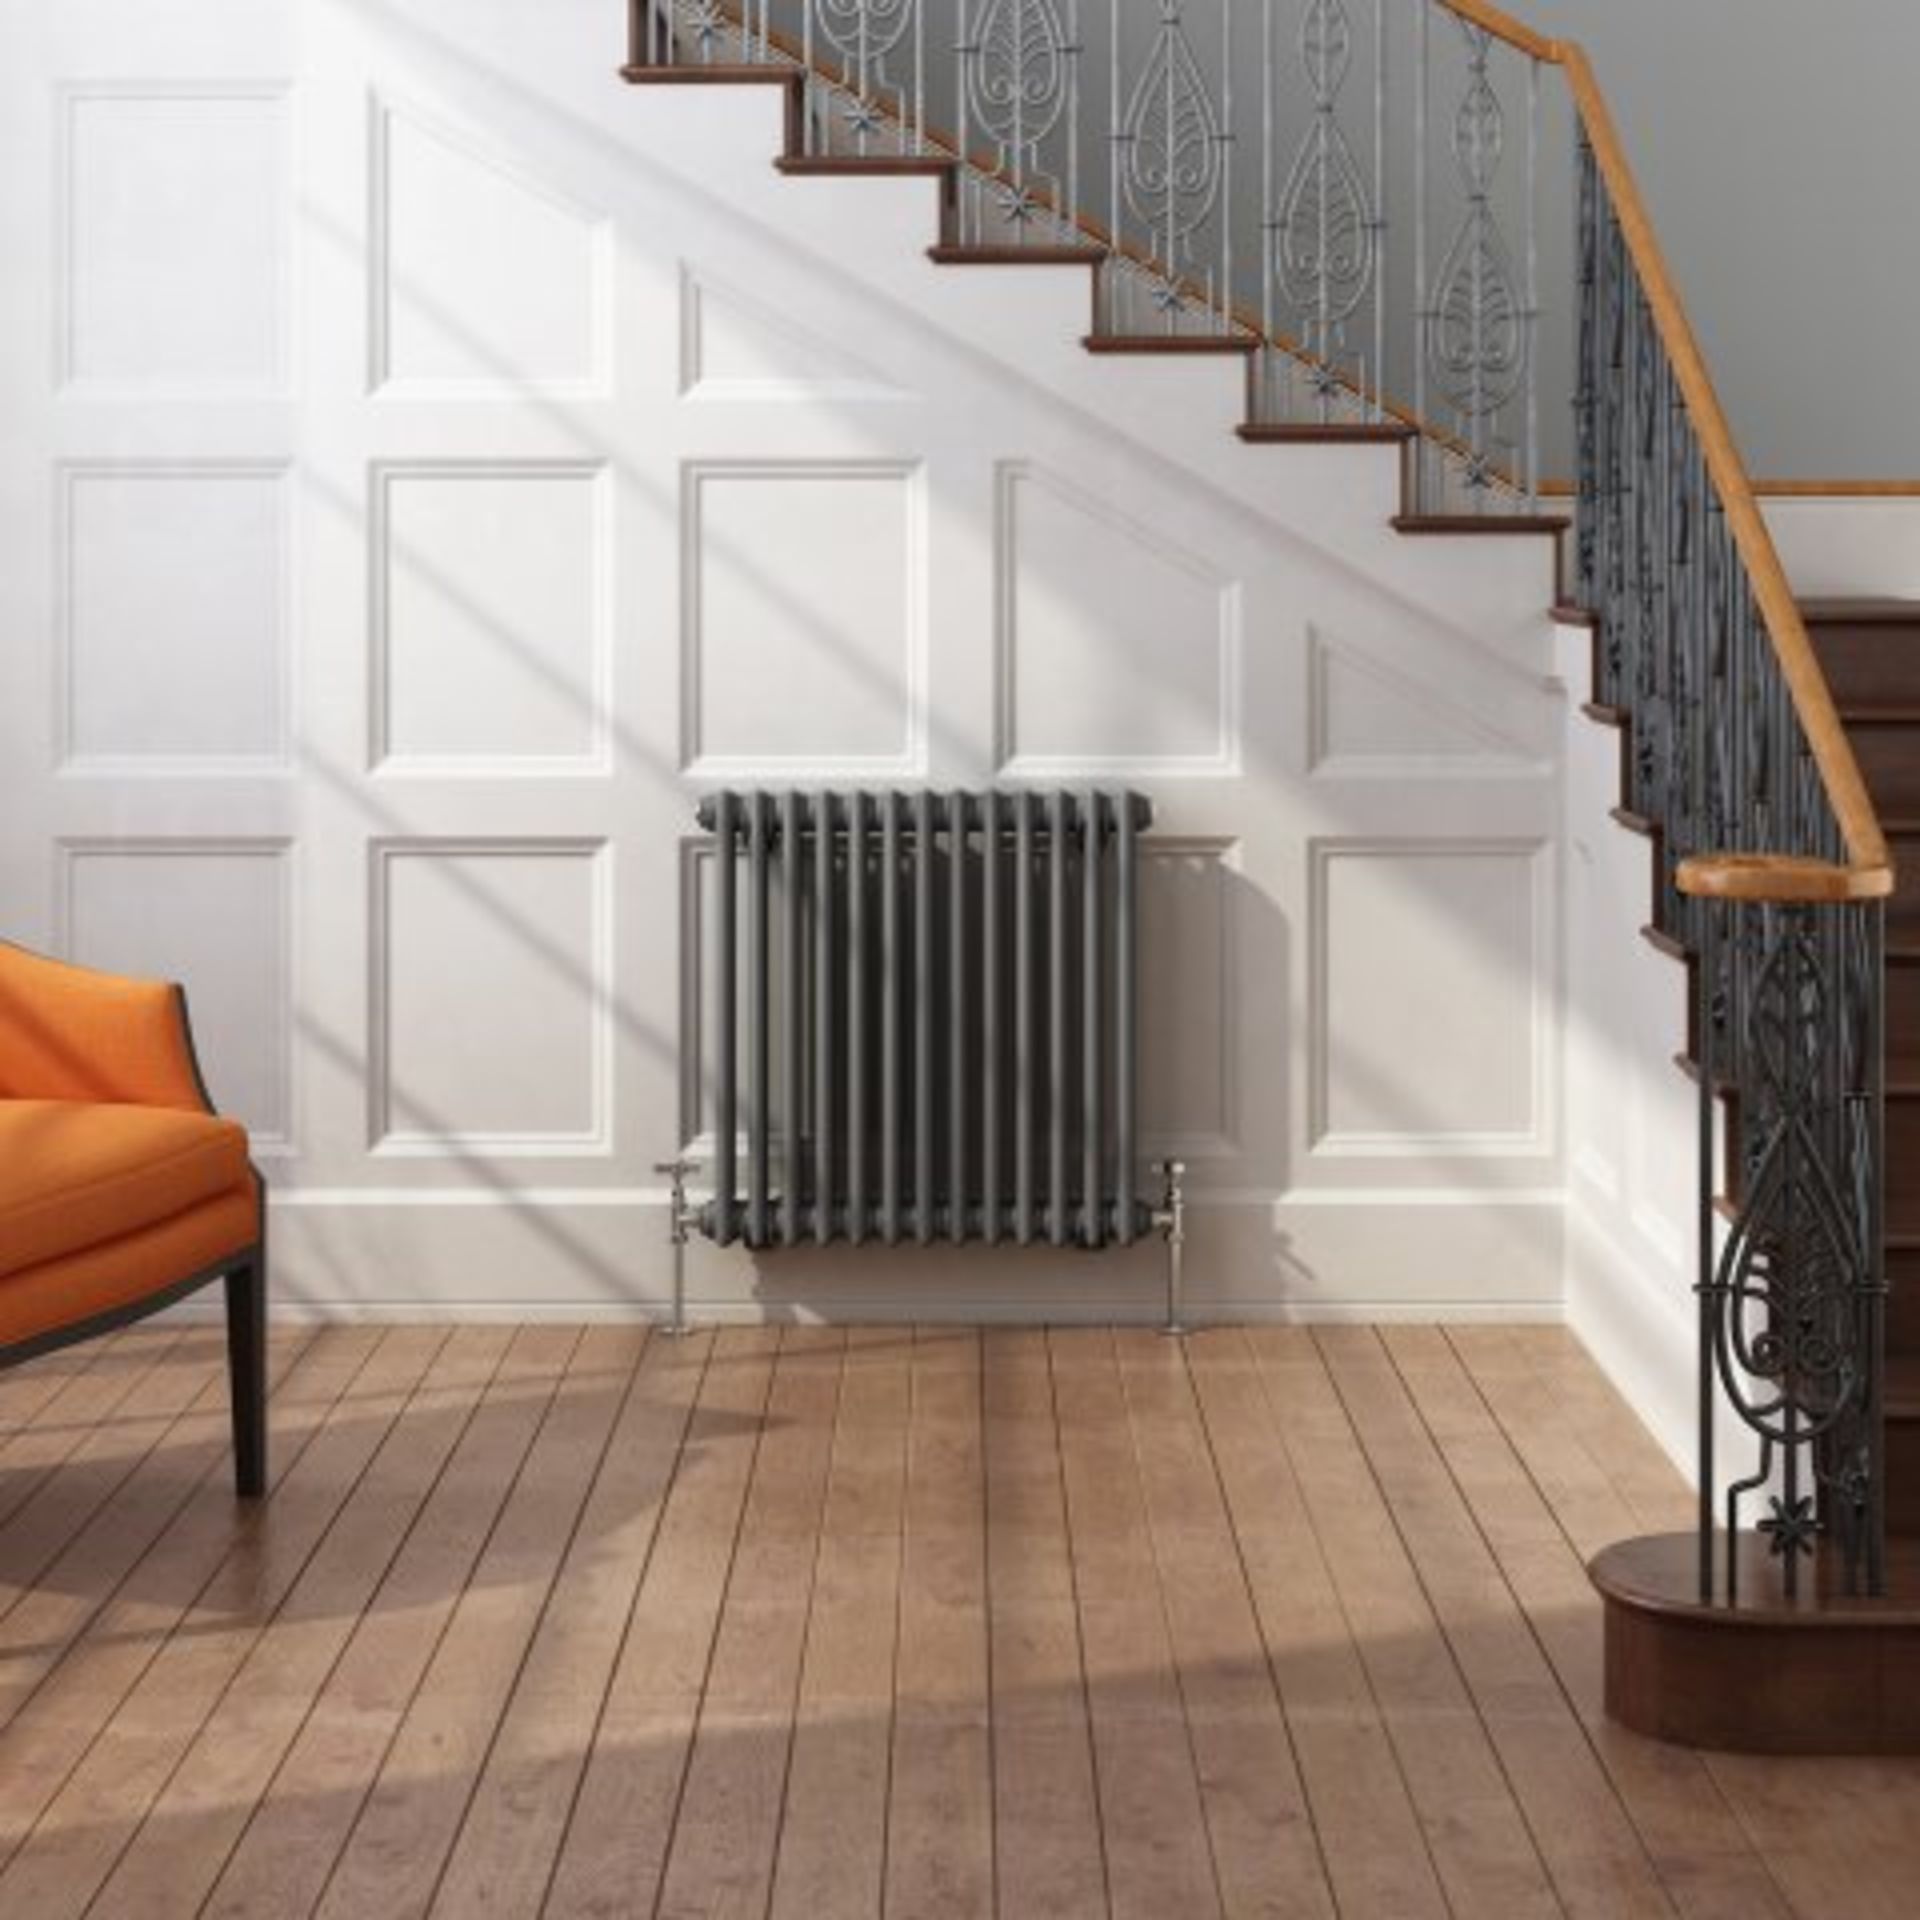 (I25) 600x603mm Anthracite Double Panel Horizontal Colosseum Traditional Radiator RRP £284.99 - Image 2 of 3